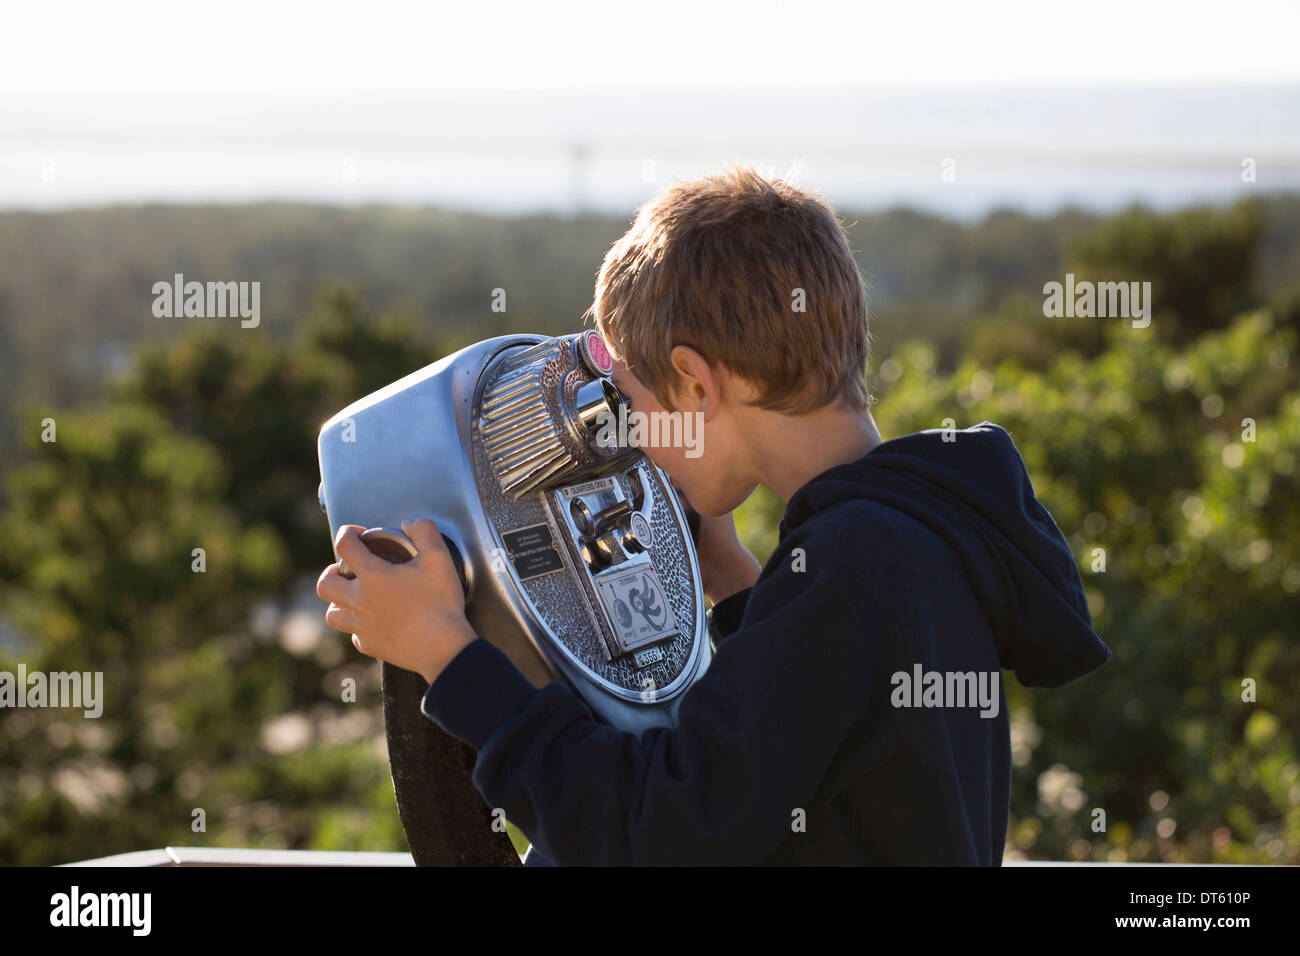 Coin operated Boy using binoculars Banque D'Images